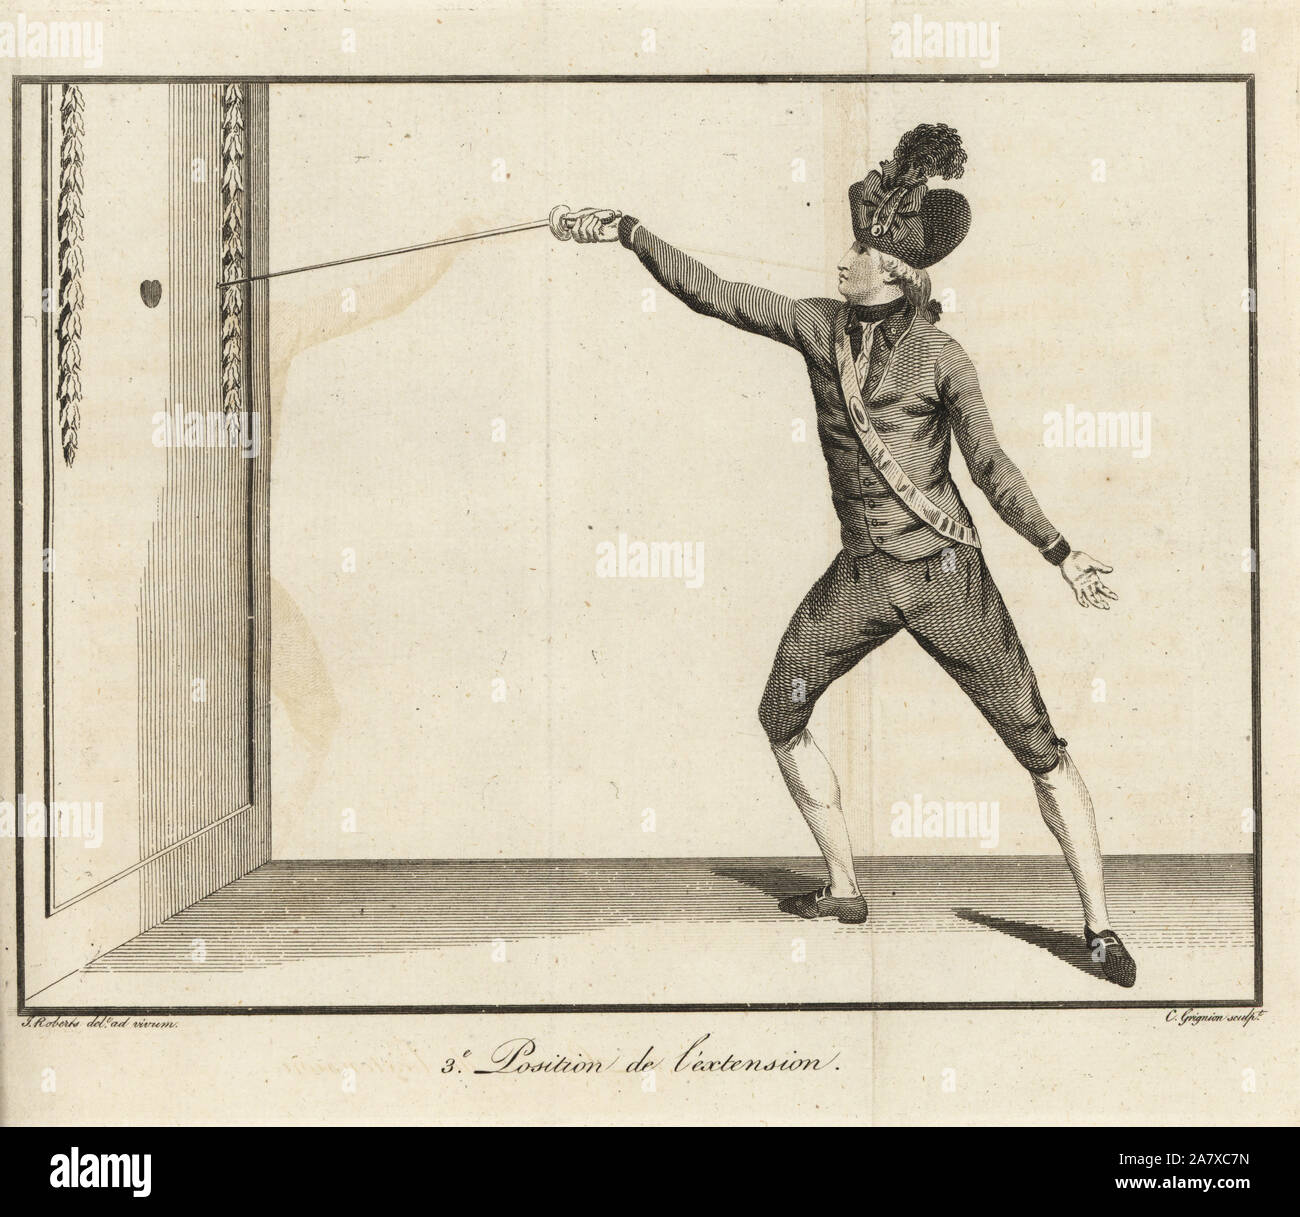 Gentleman fencer in third position of extension or thrust. Copperplate engraving by C. Grignion after an illustration drawn from life by J. Roberts from Mr. J. Olivier's Fencing Familiarized, or a New Treatise on the Art of Sword Play, John Bell, London, 1771. Stock Photo